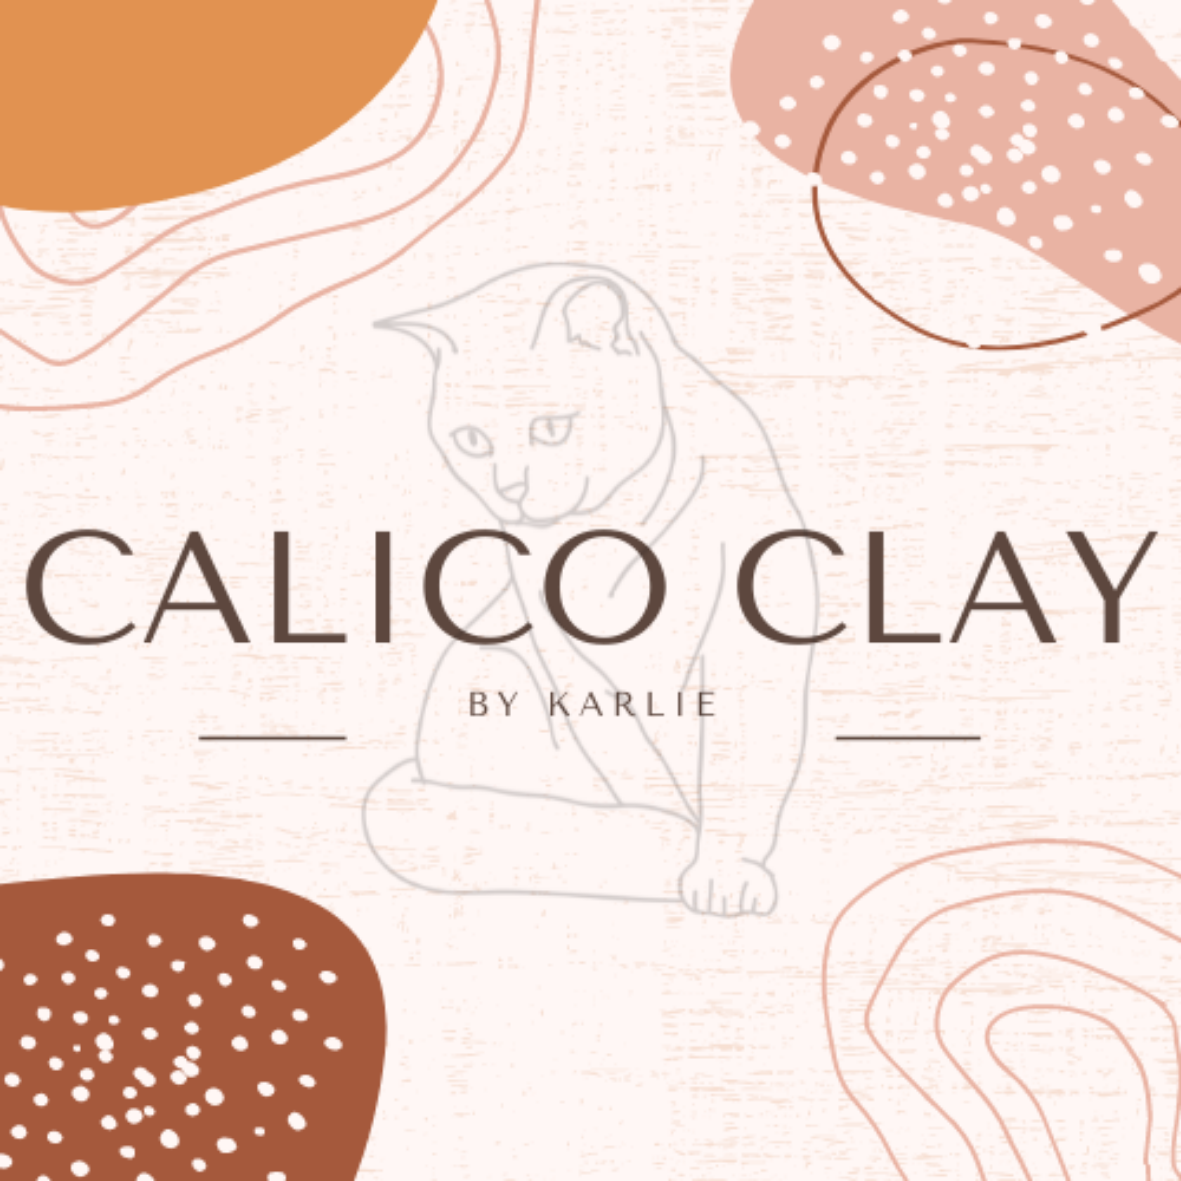 Calico Clay by Karlie